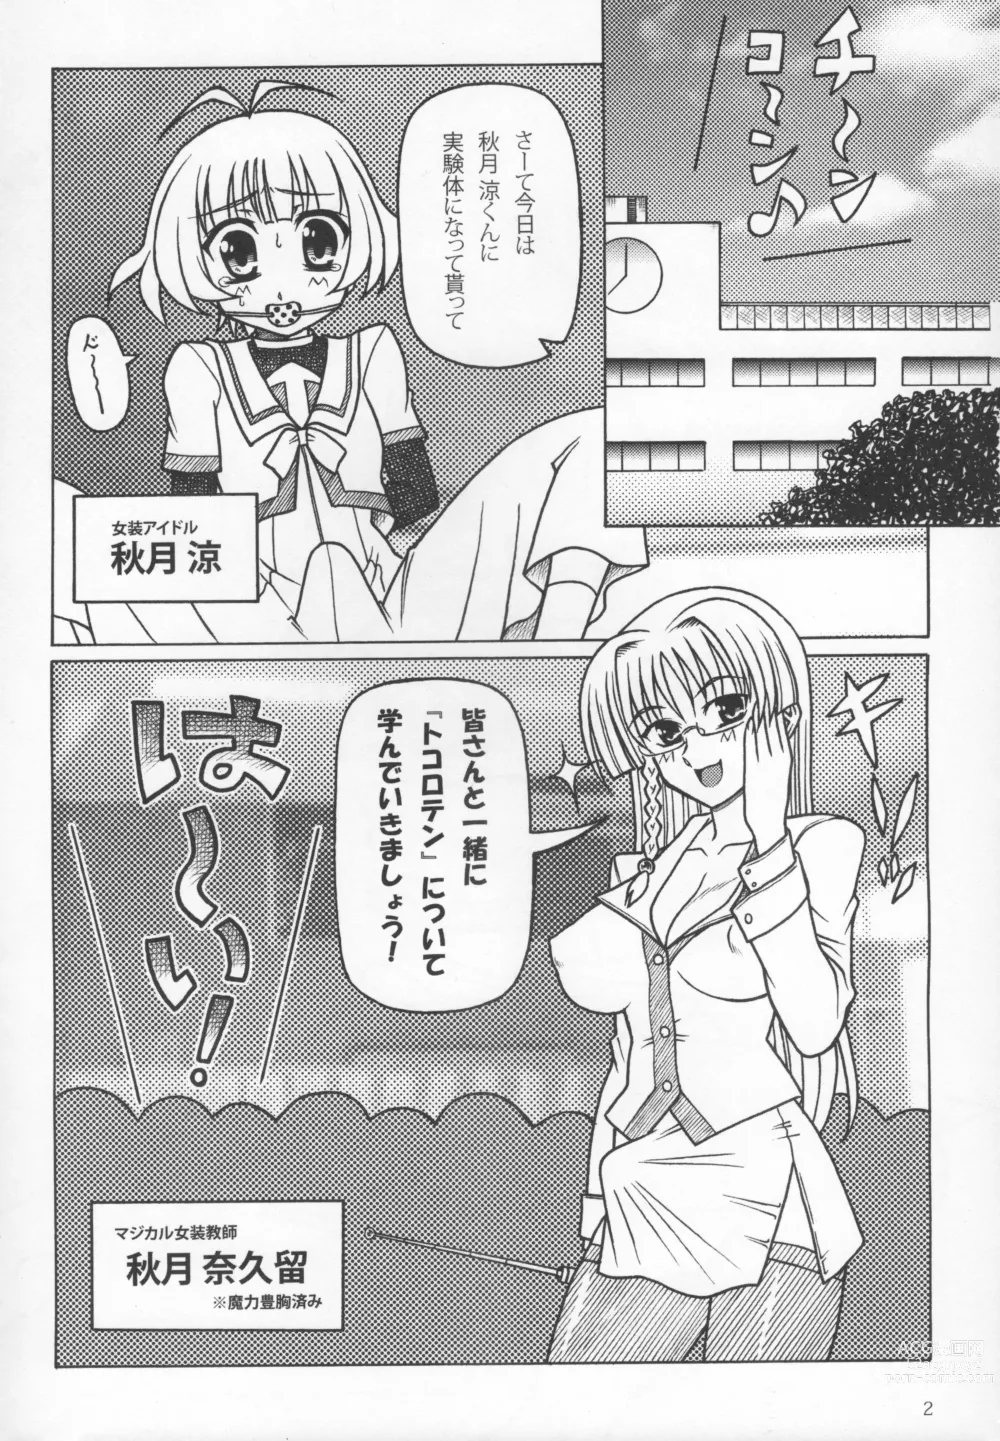 Page 3 of doujinshi SHEMALELOVERS Vol.14